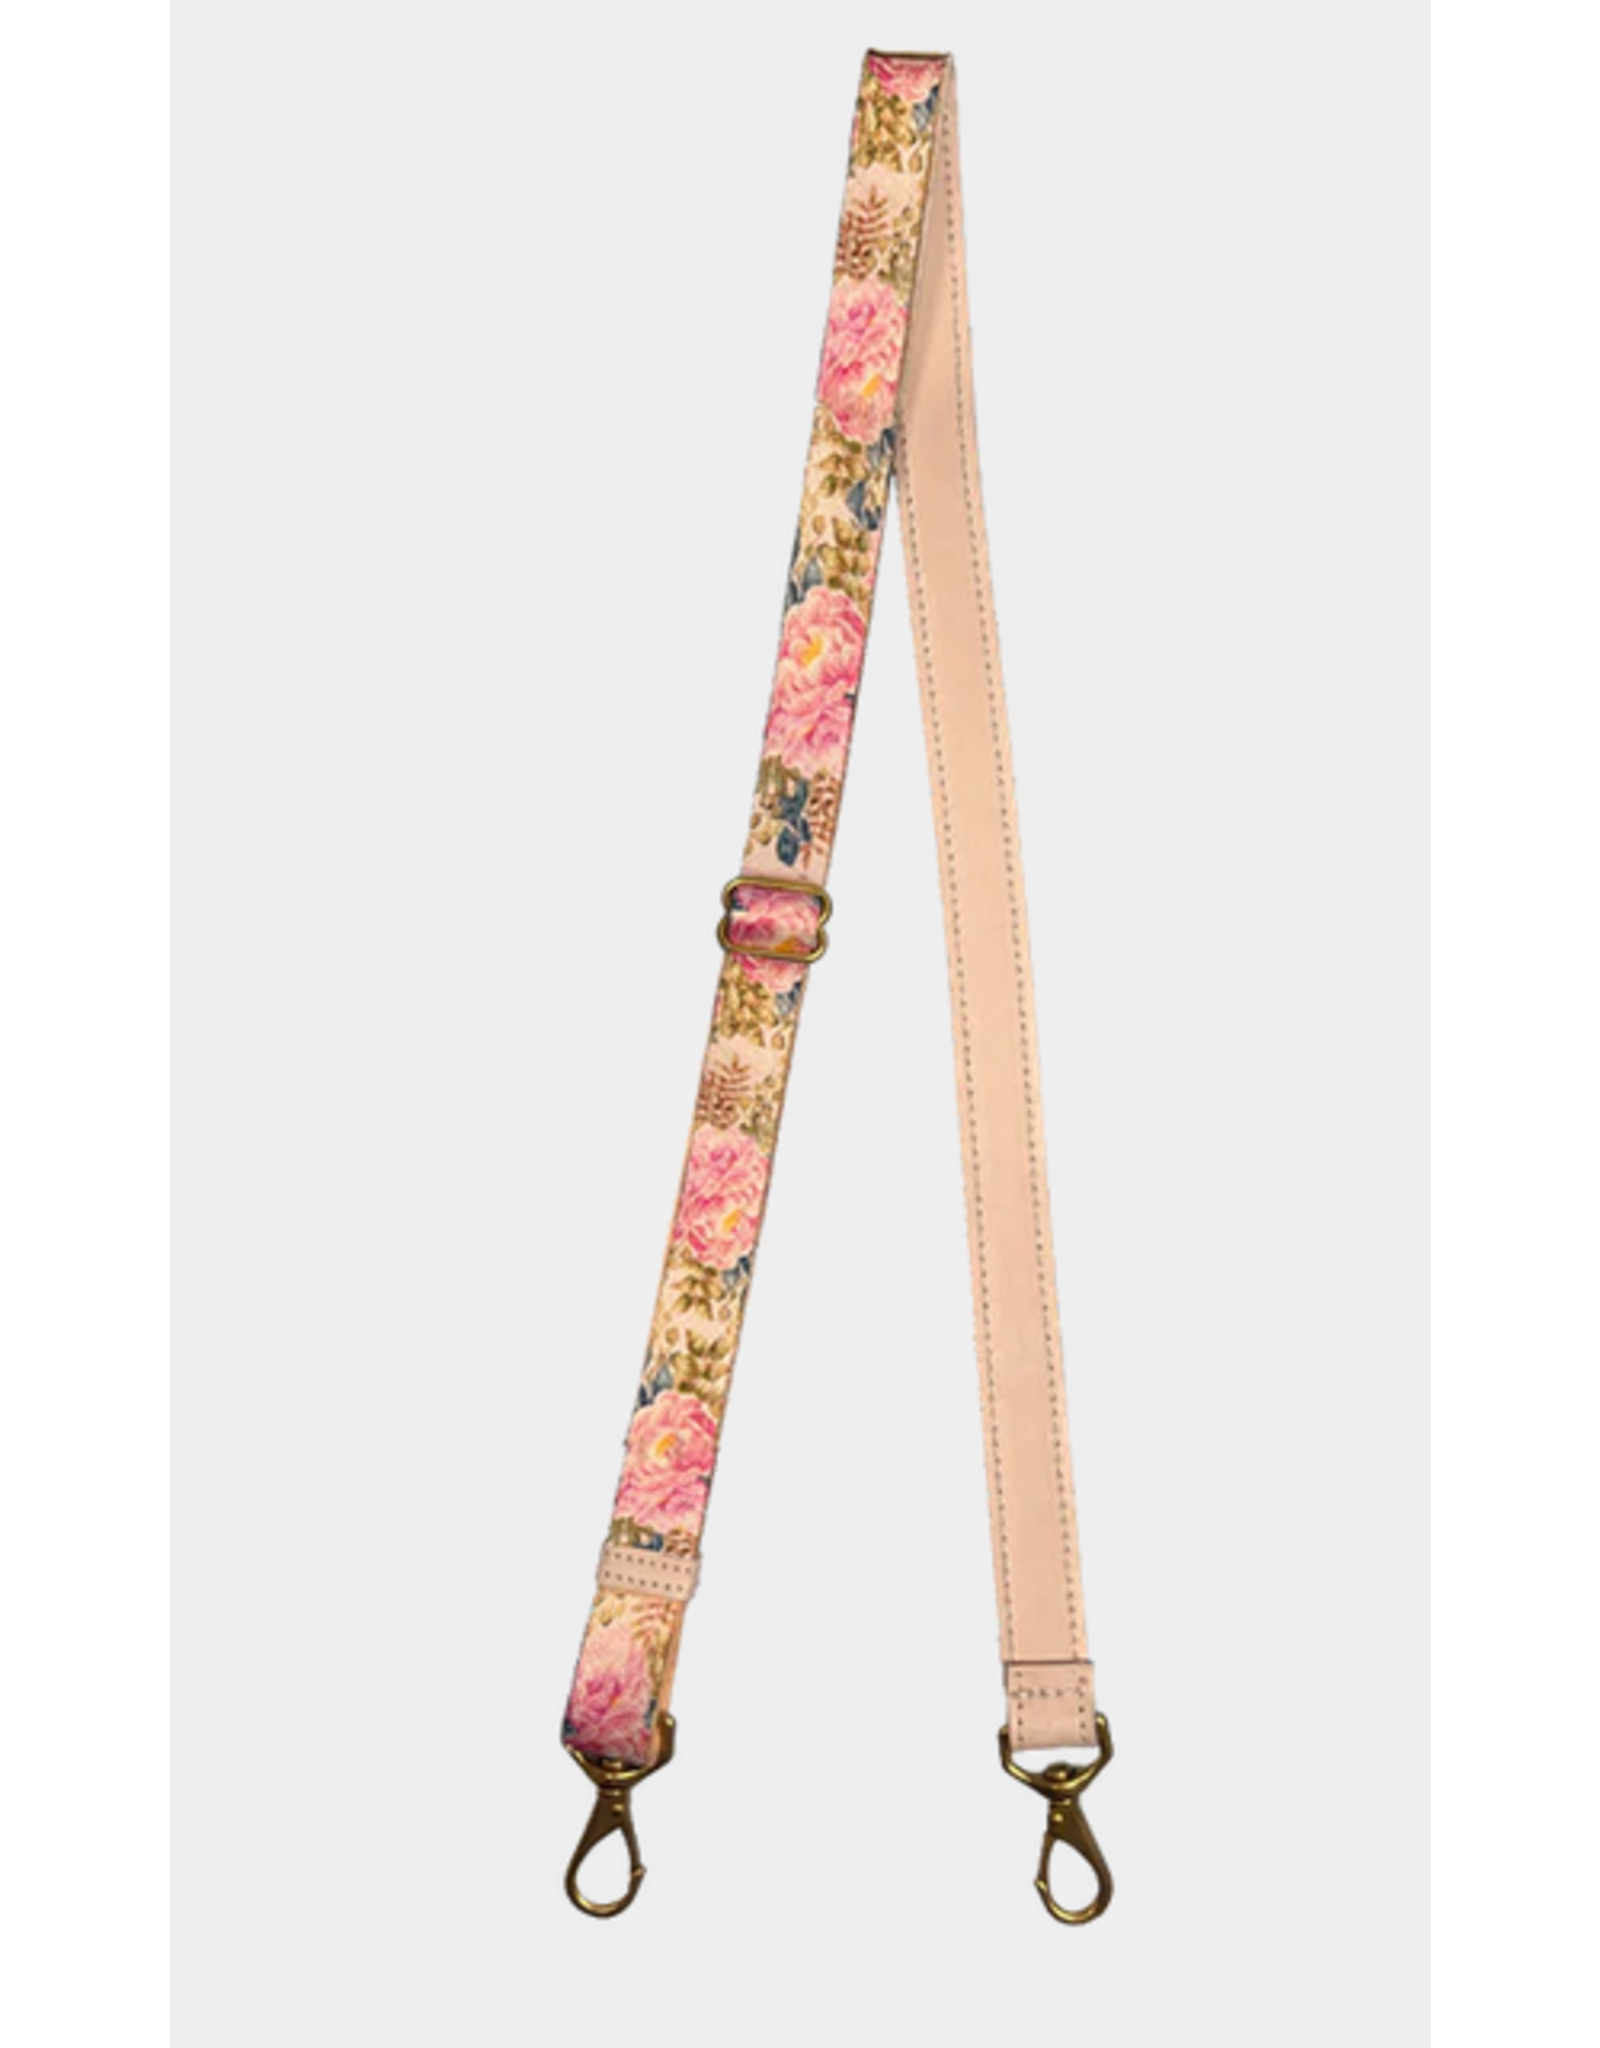 JH Adjustable Strap 1 Natural Leather with Peony Webbing